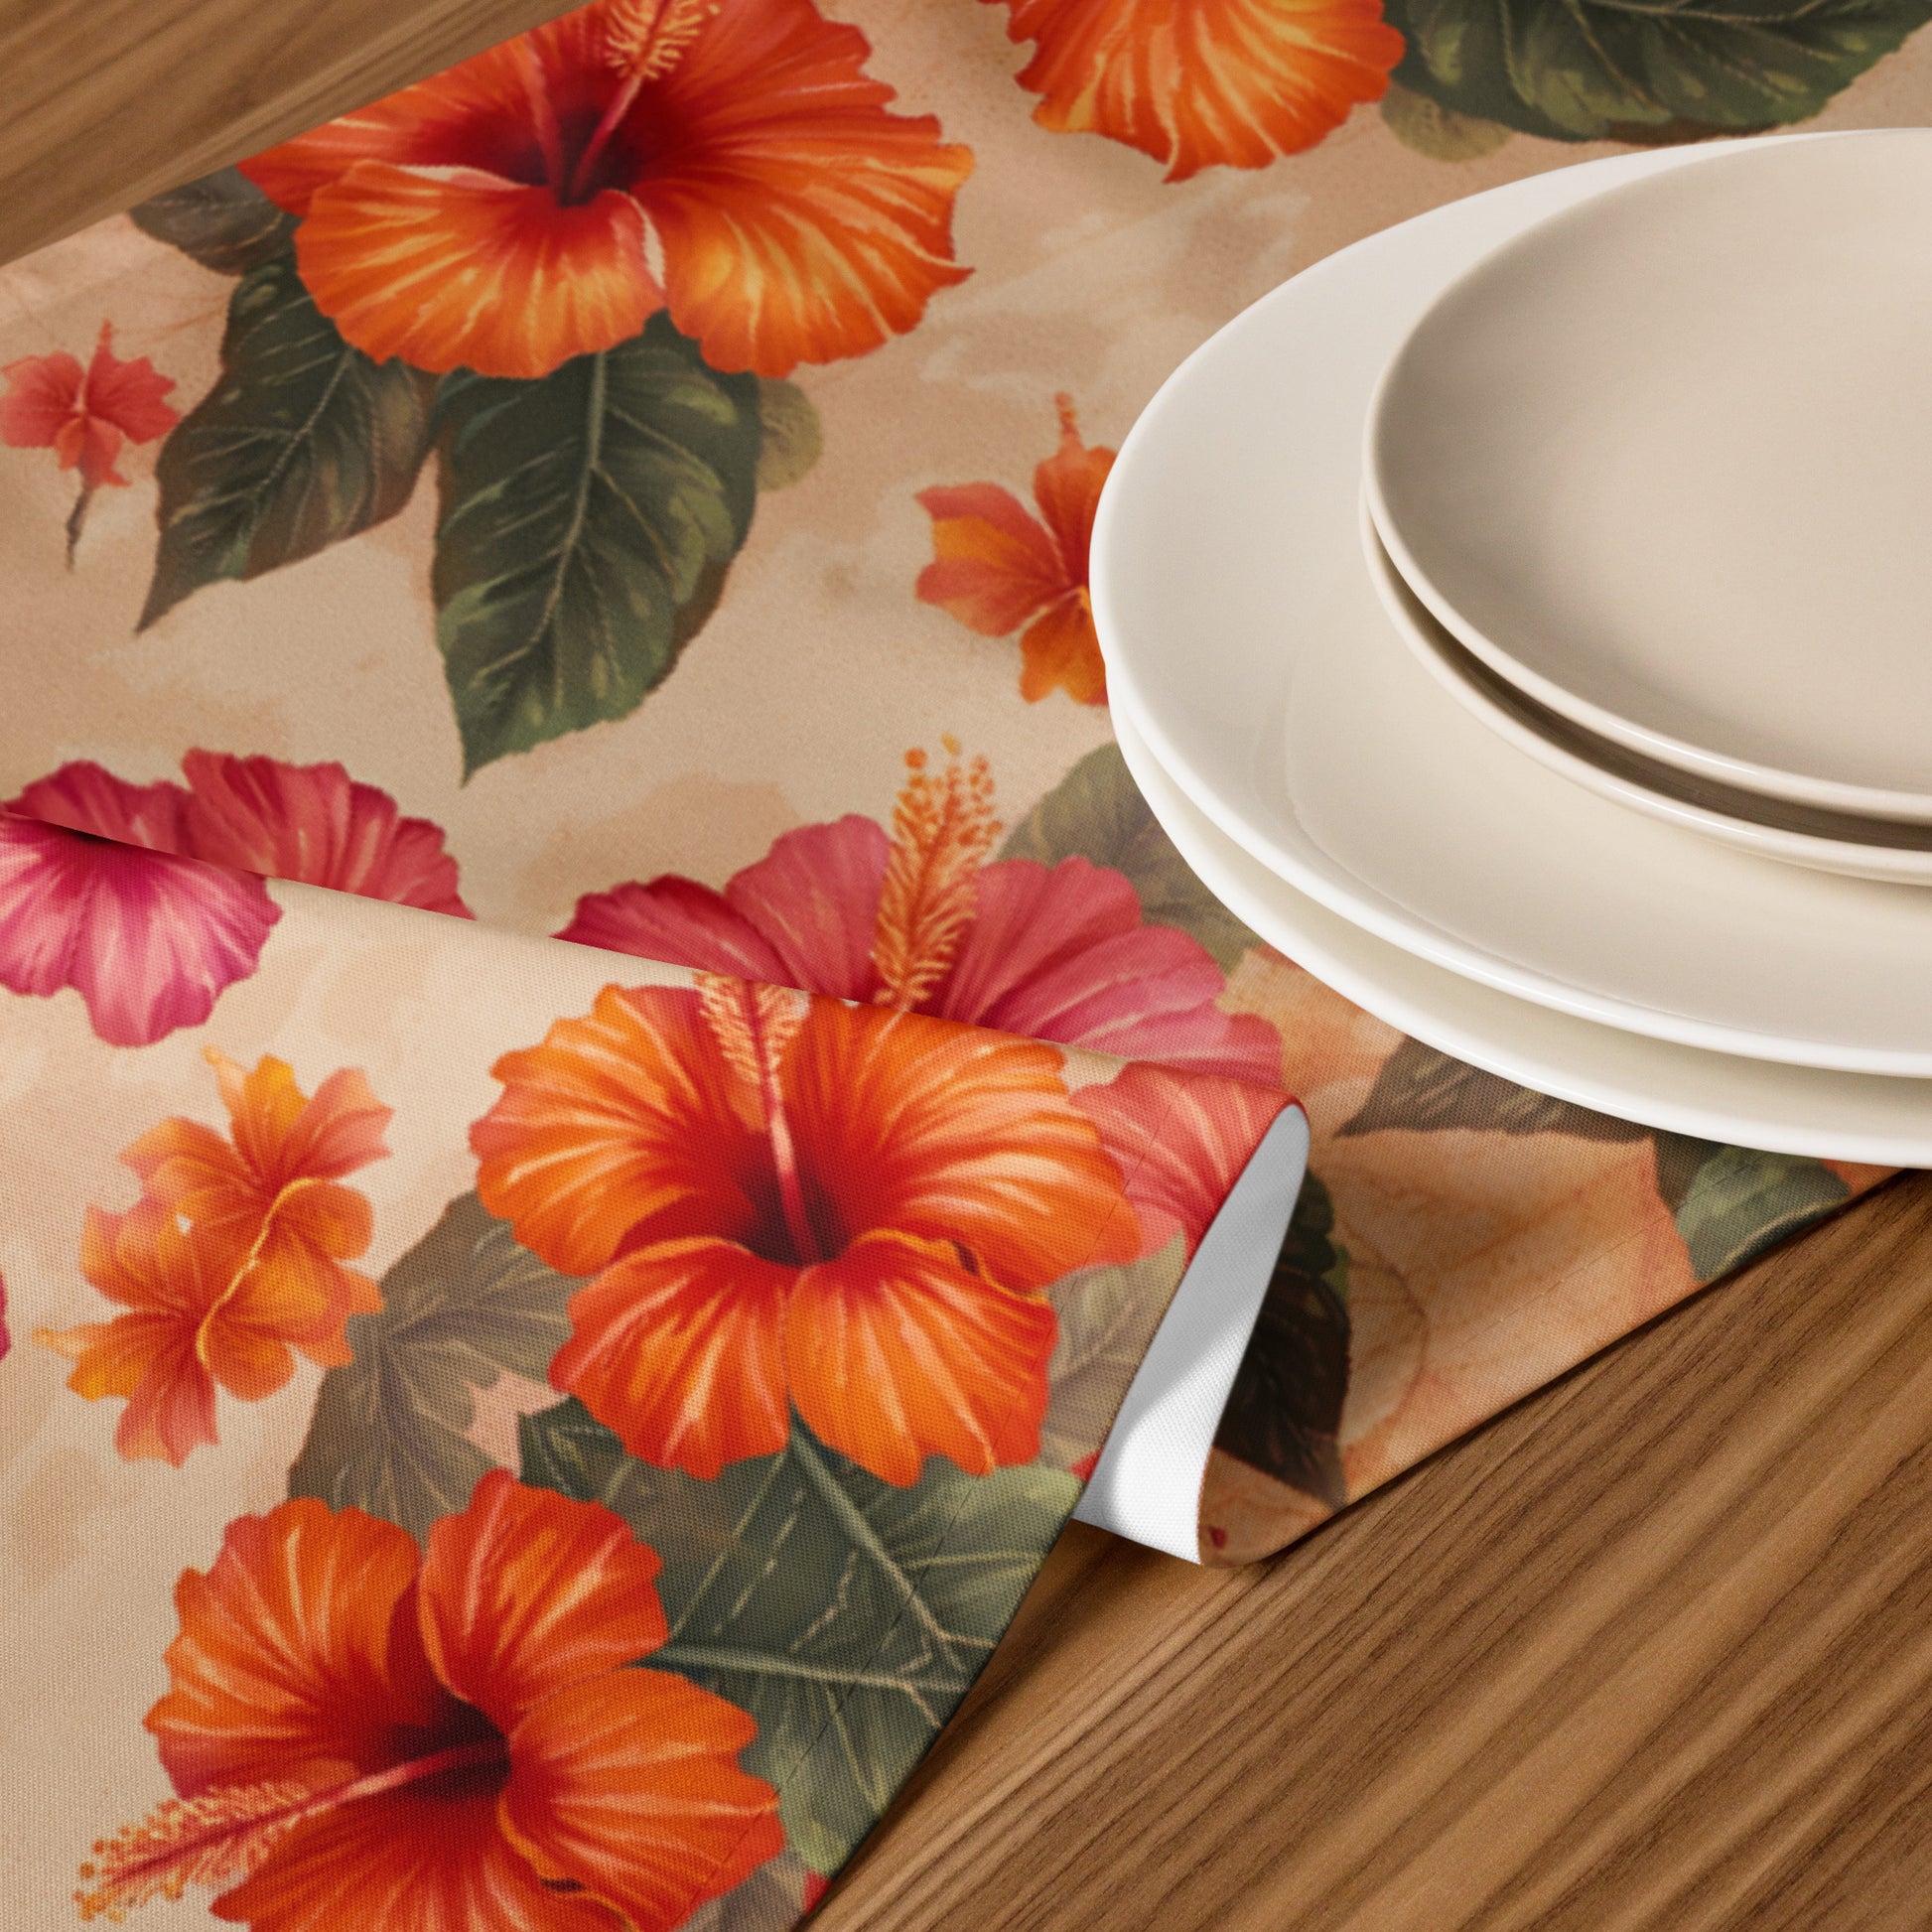 Pink and Orange Hibiscus Flowers Print Table Runner on table